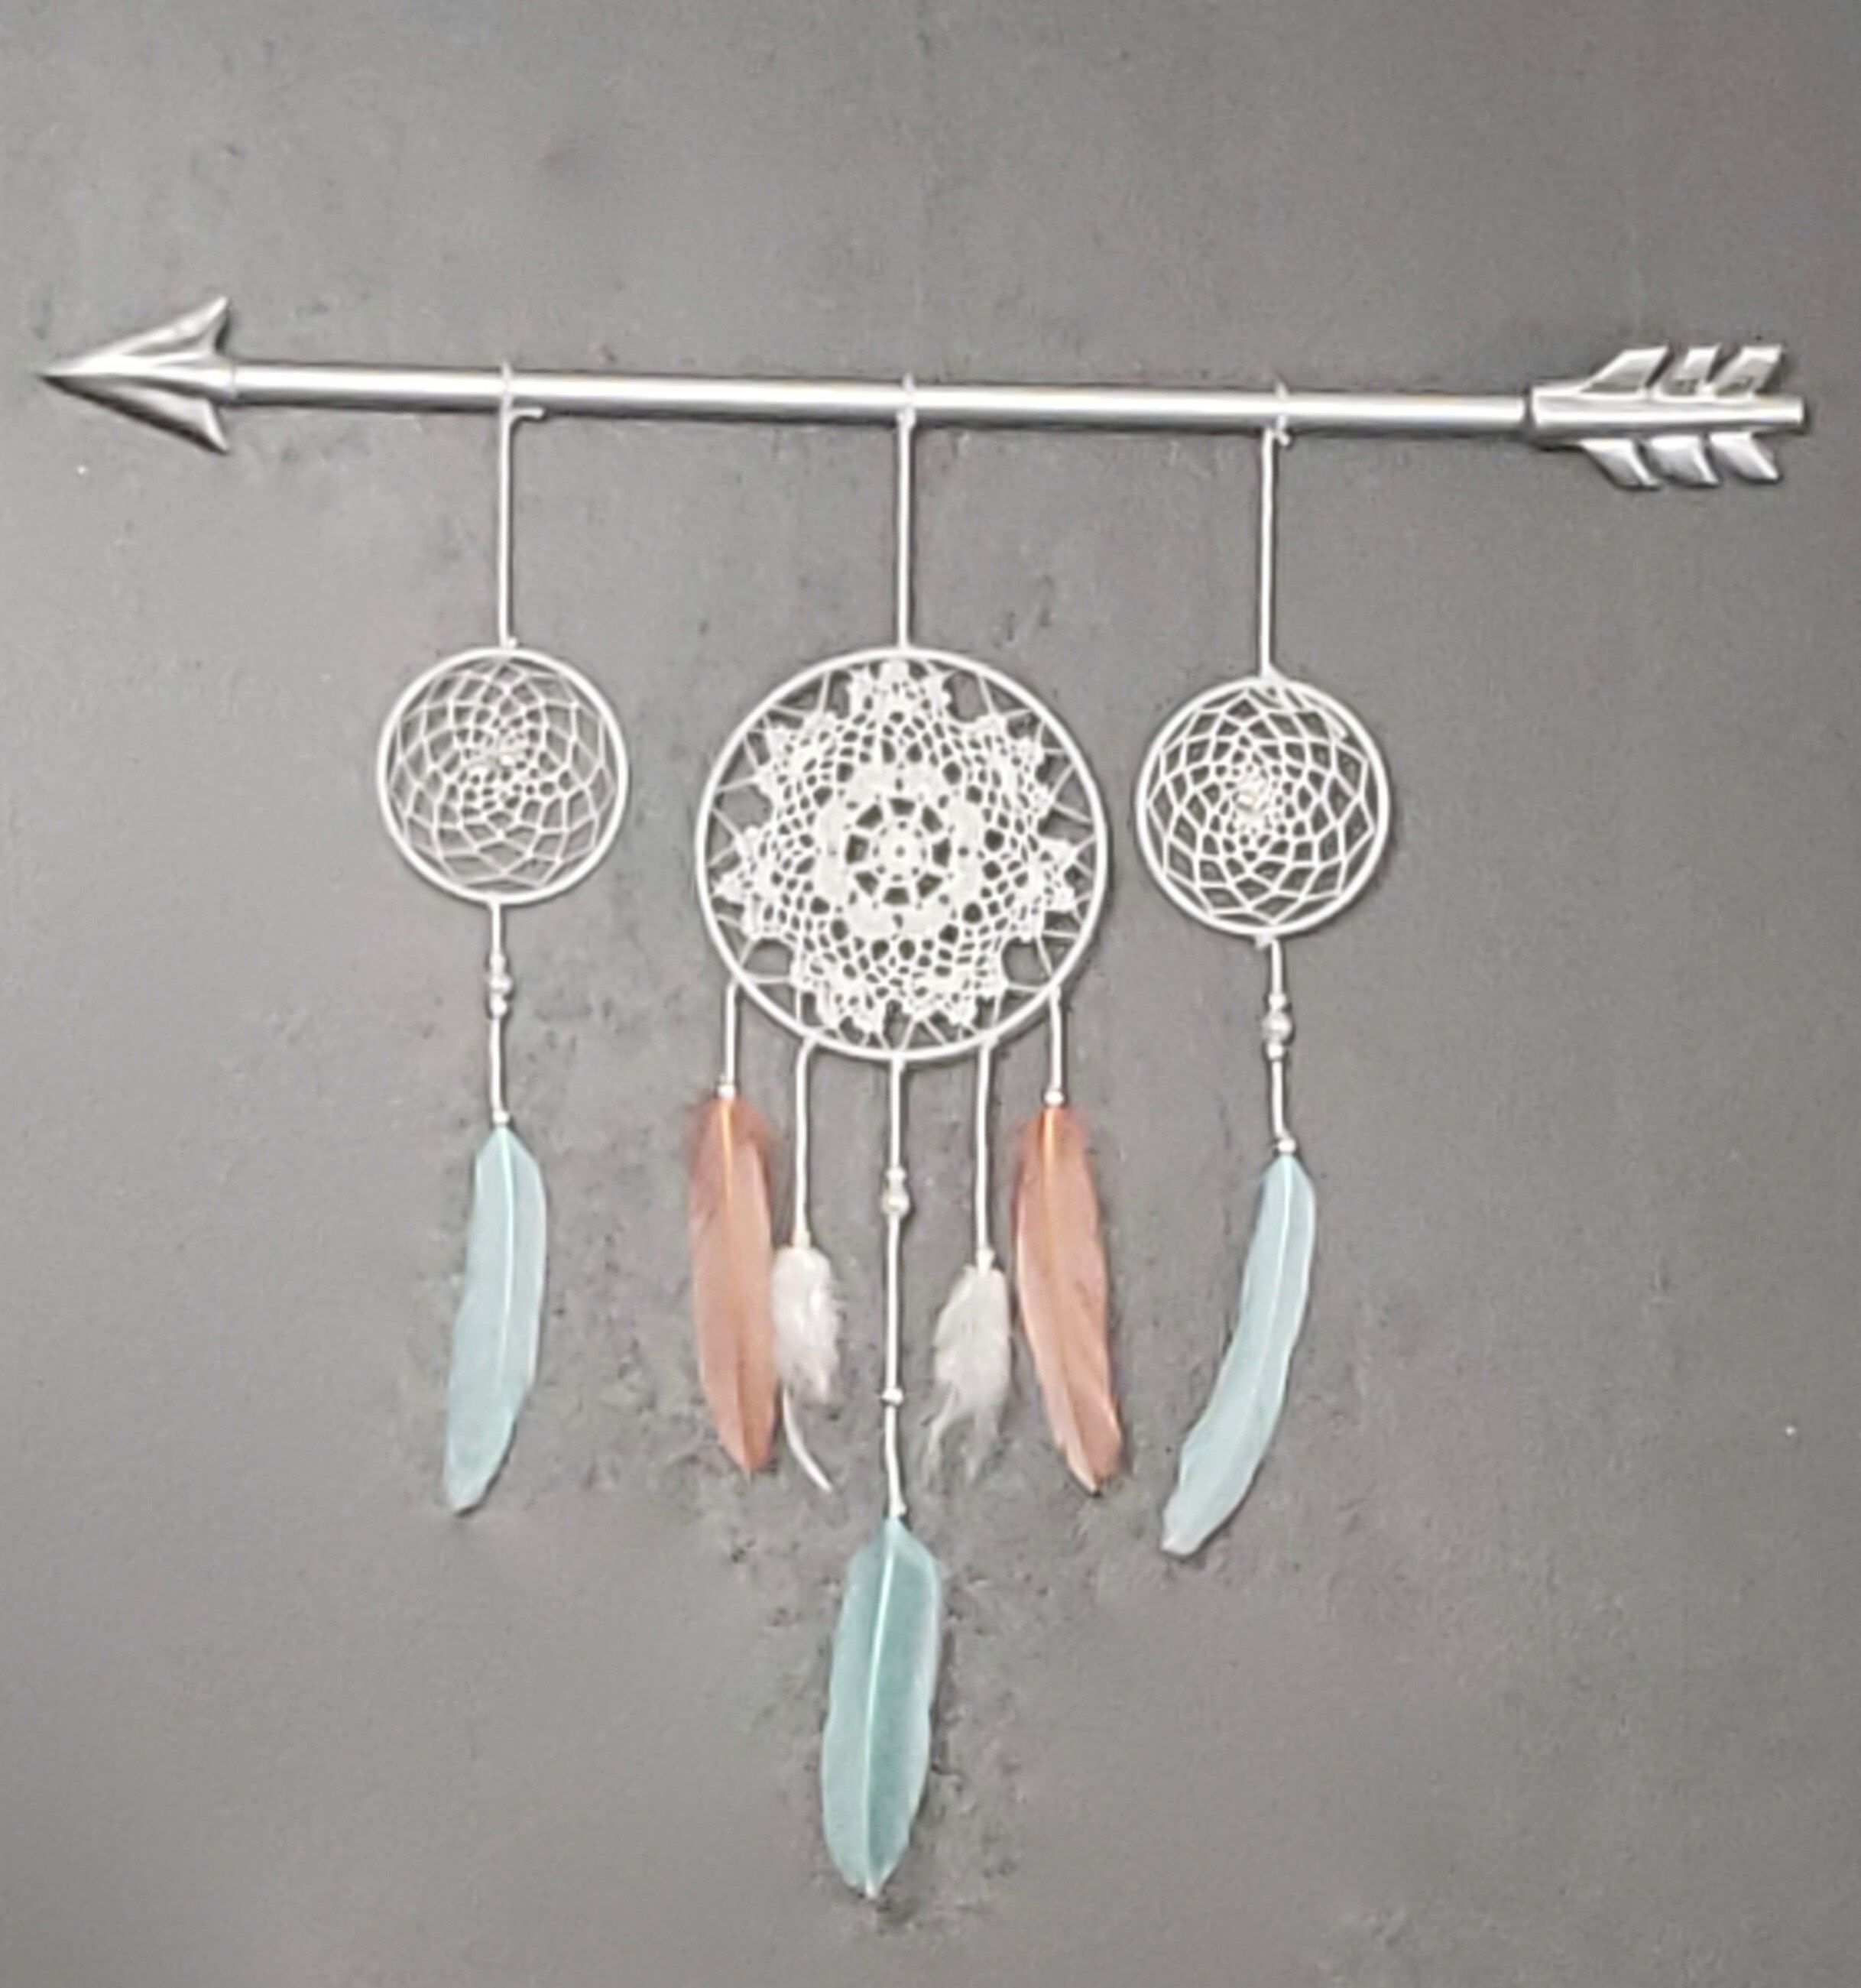 Feather Dreamcatcher Wall Hanging Nursery Boho Chic Arrow Whimsical Baby Dream Catcher Pastel Colors Arrow Hanging Handmade Dreamcatcher - Feather Dreamcatcher Wall Hanging Nursery Boho Chic Arrow Whimsical Baby Dream Catcher Pastel Colors Arrow Hanging Handmade Dreamcatcher -   19 diy Dream Catcher doily ideas